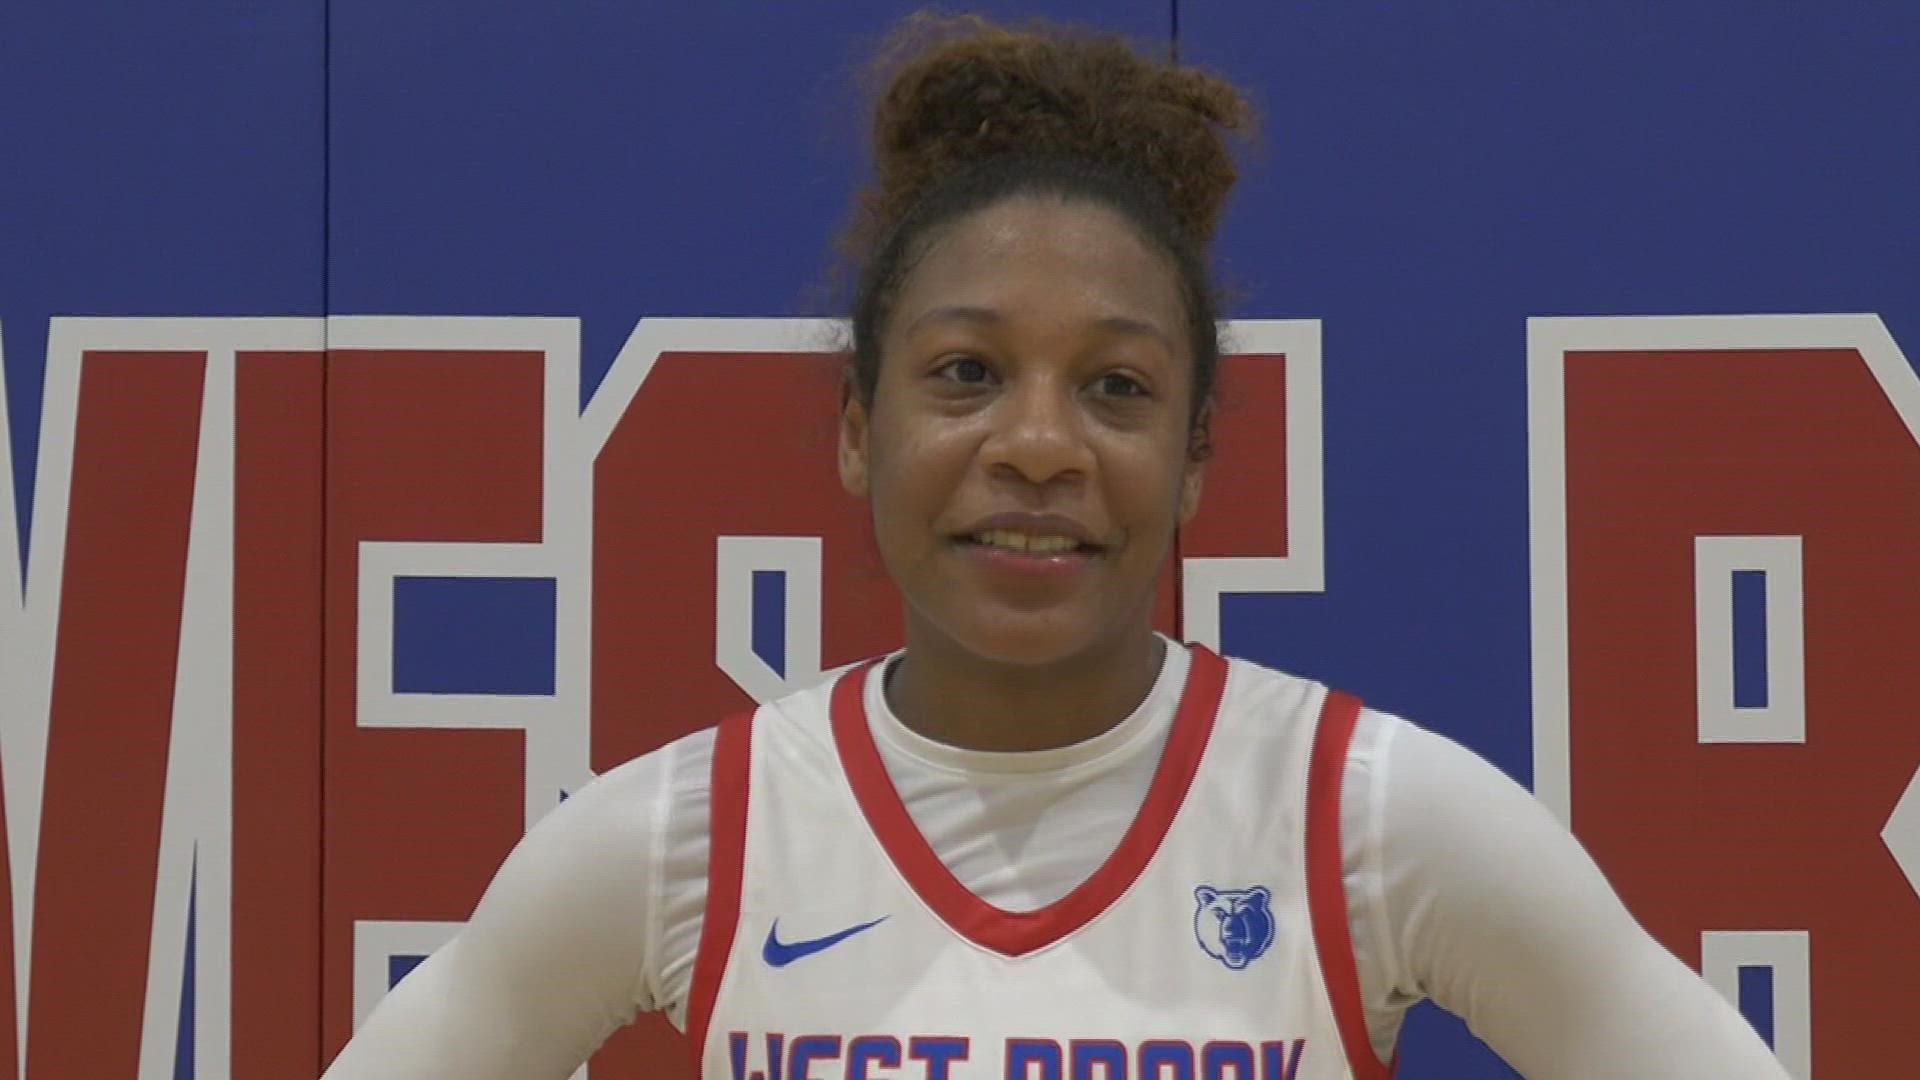 Lady Bruin senior Jacei Denley says she's grateful for the chance to represent her hometown.